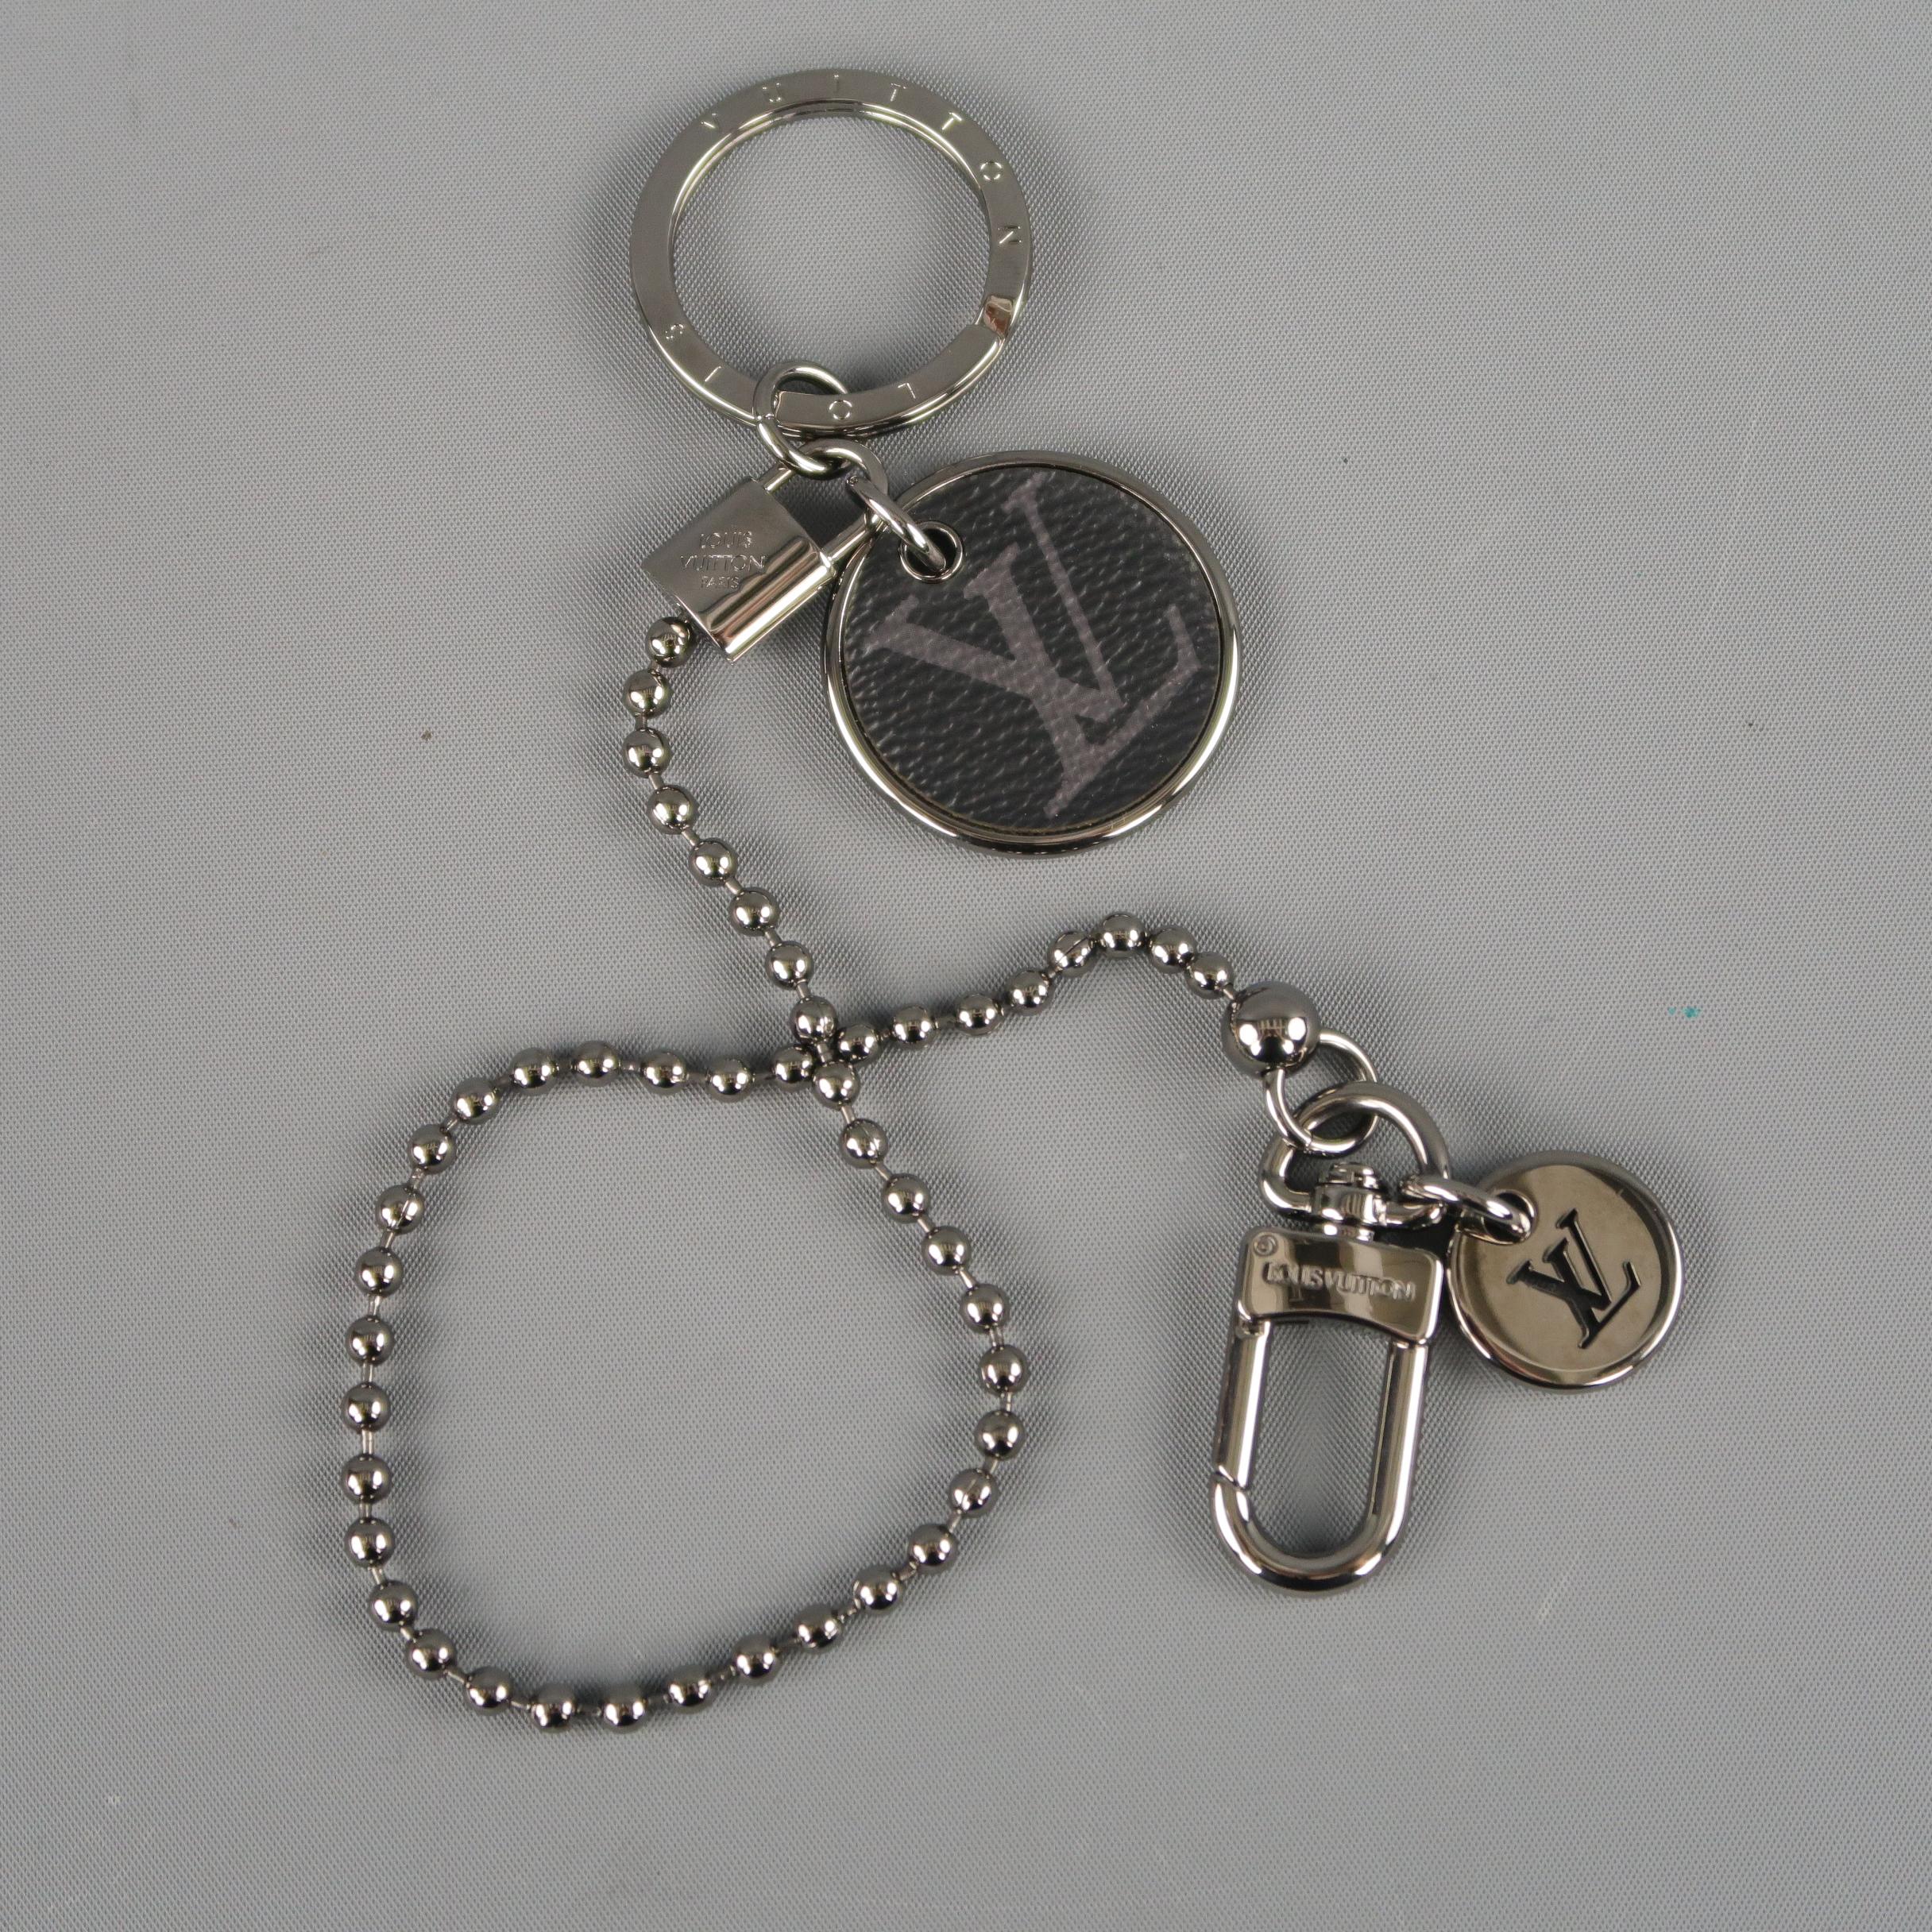 LOUIS VUITTON wallet key chain comes in smoke silver tone metal and features a ball chain with a LV monogram cutout charm and clasp on one side and mock lock, embossed key loop, and gray canvas charm on the other. With box. Made in Italy.
